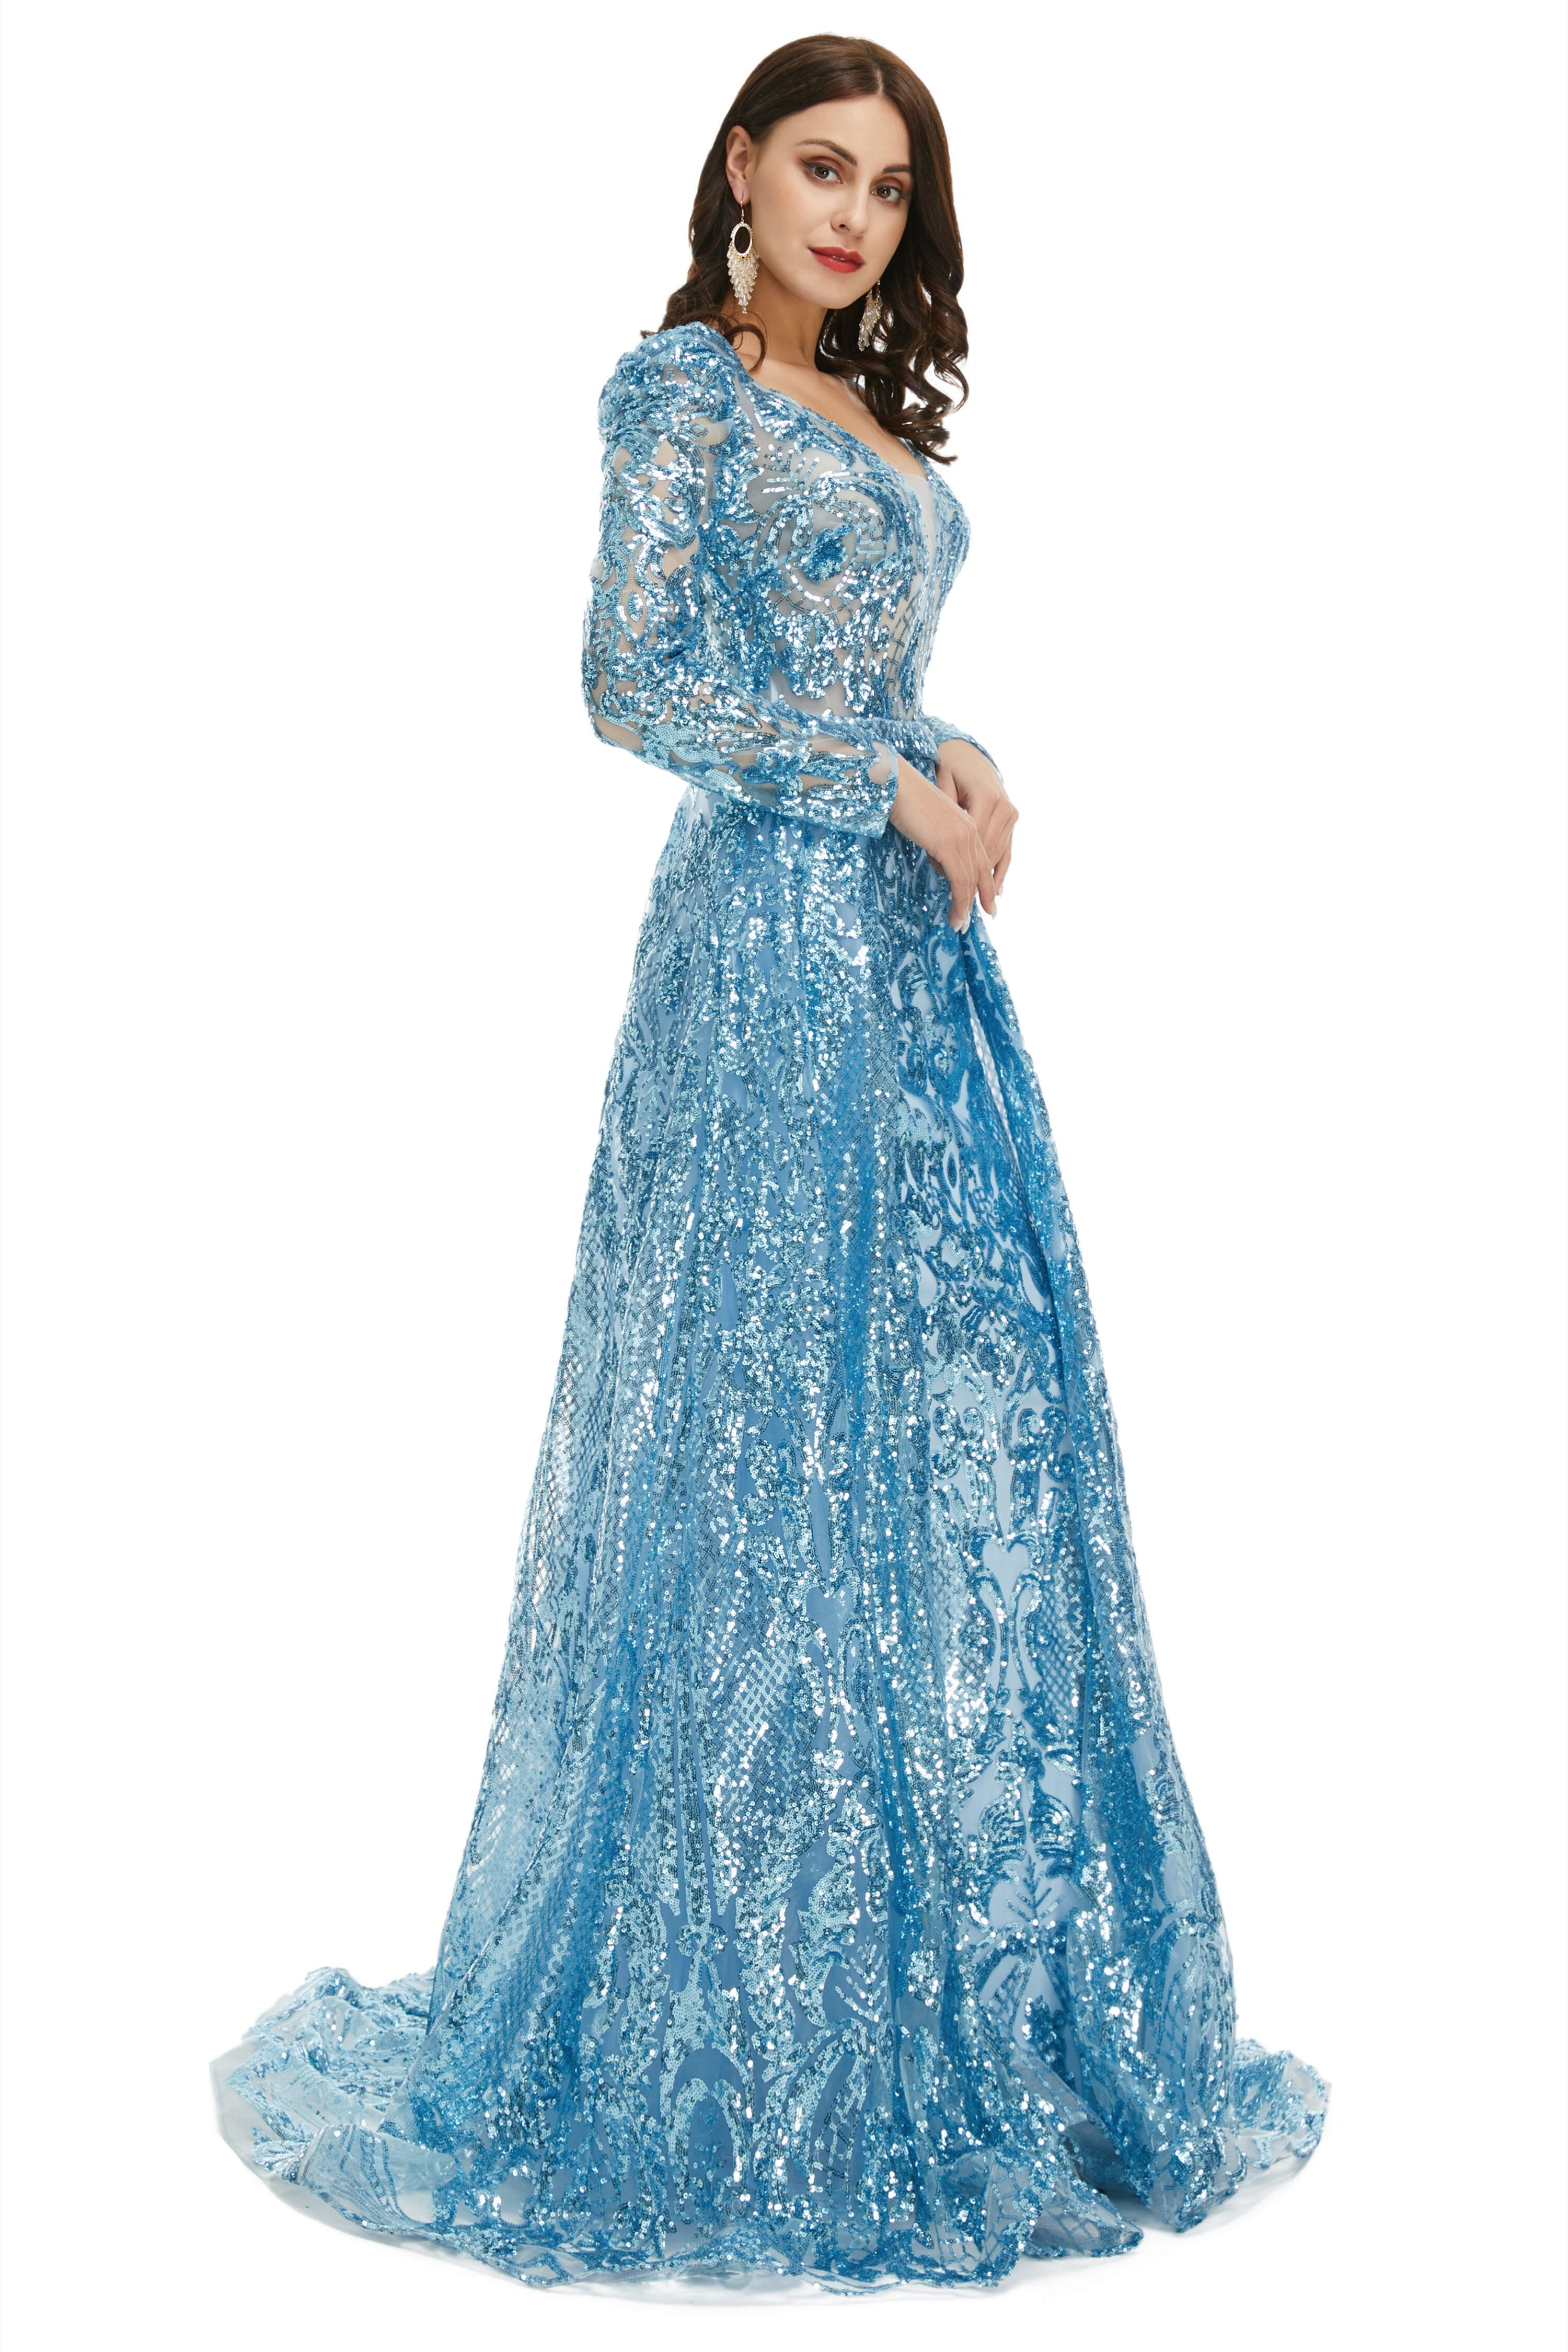 Homecome Dresses Short Prom, Blue Sequin With Detachable Train Long Sleeves Mermaid Evening Dresses